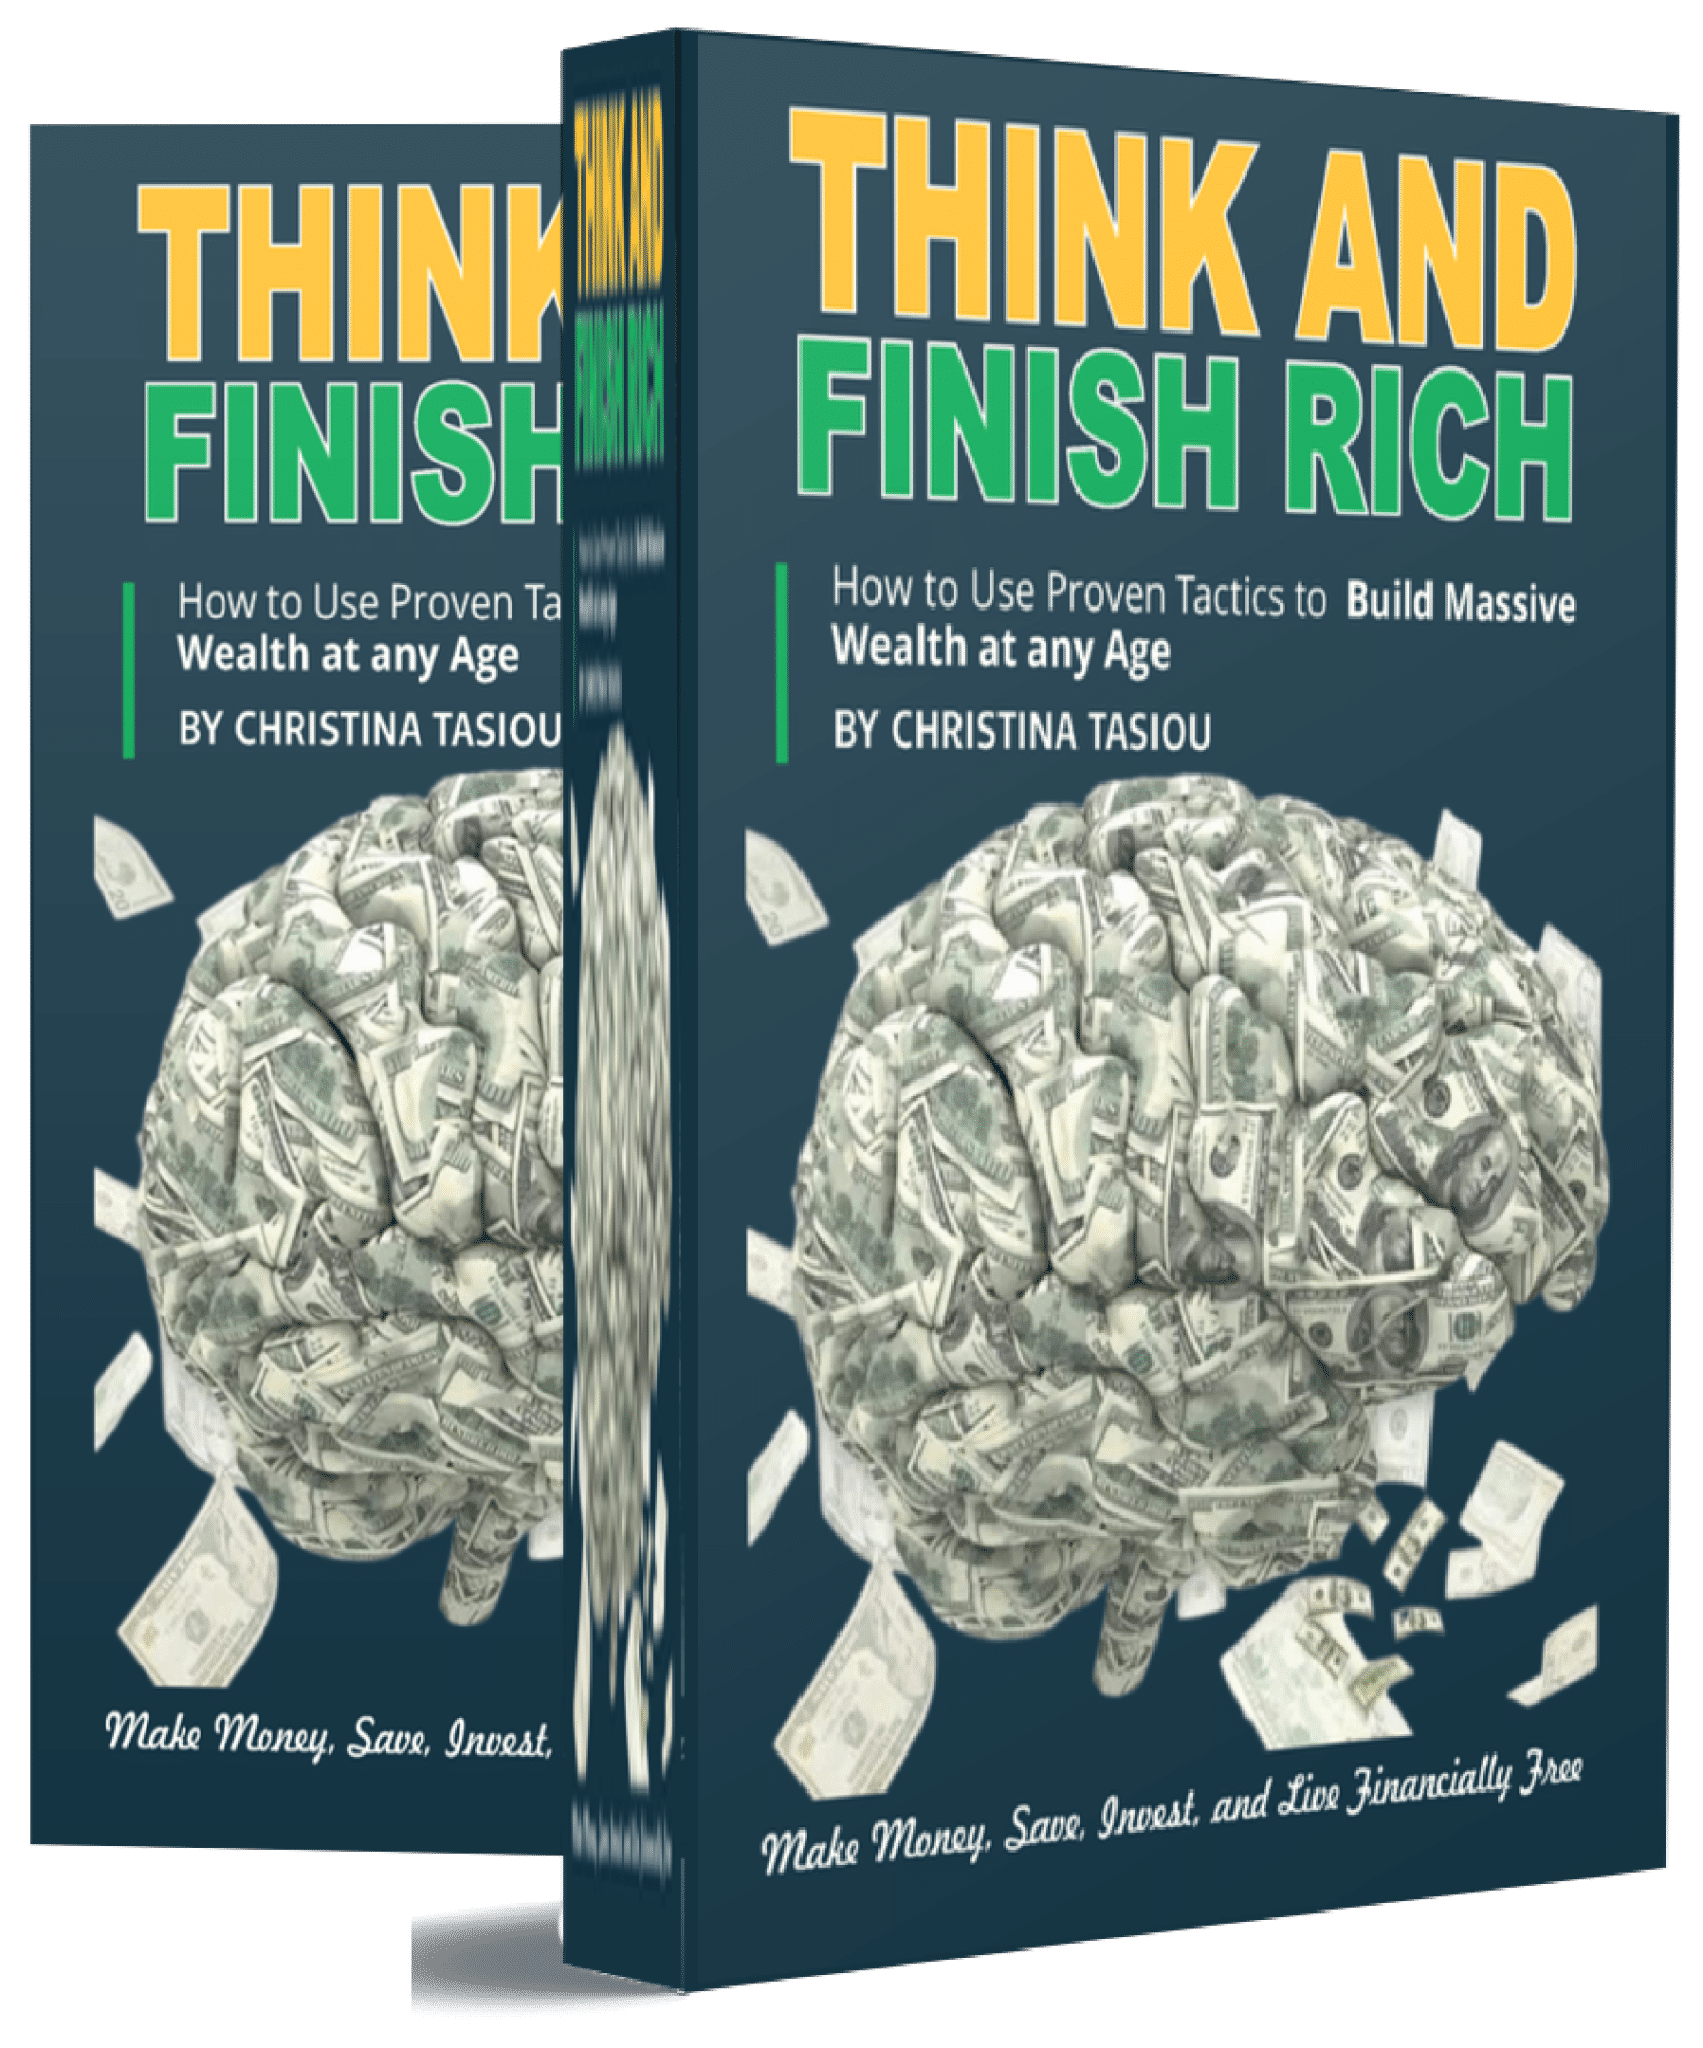 THINK AND FINISH RICH